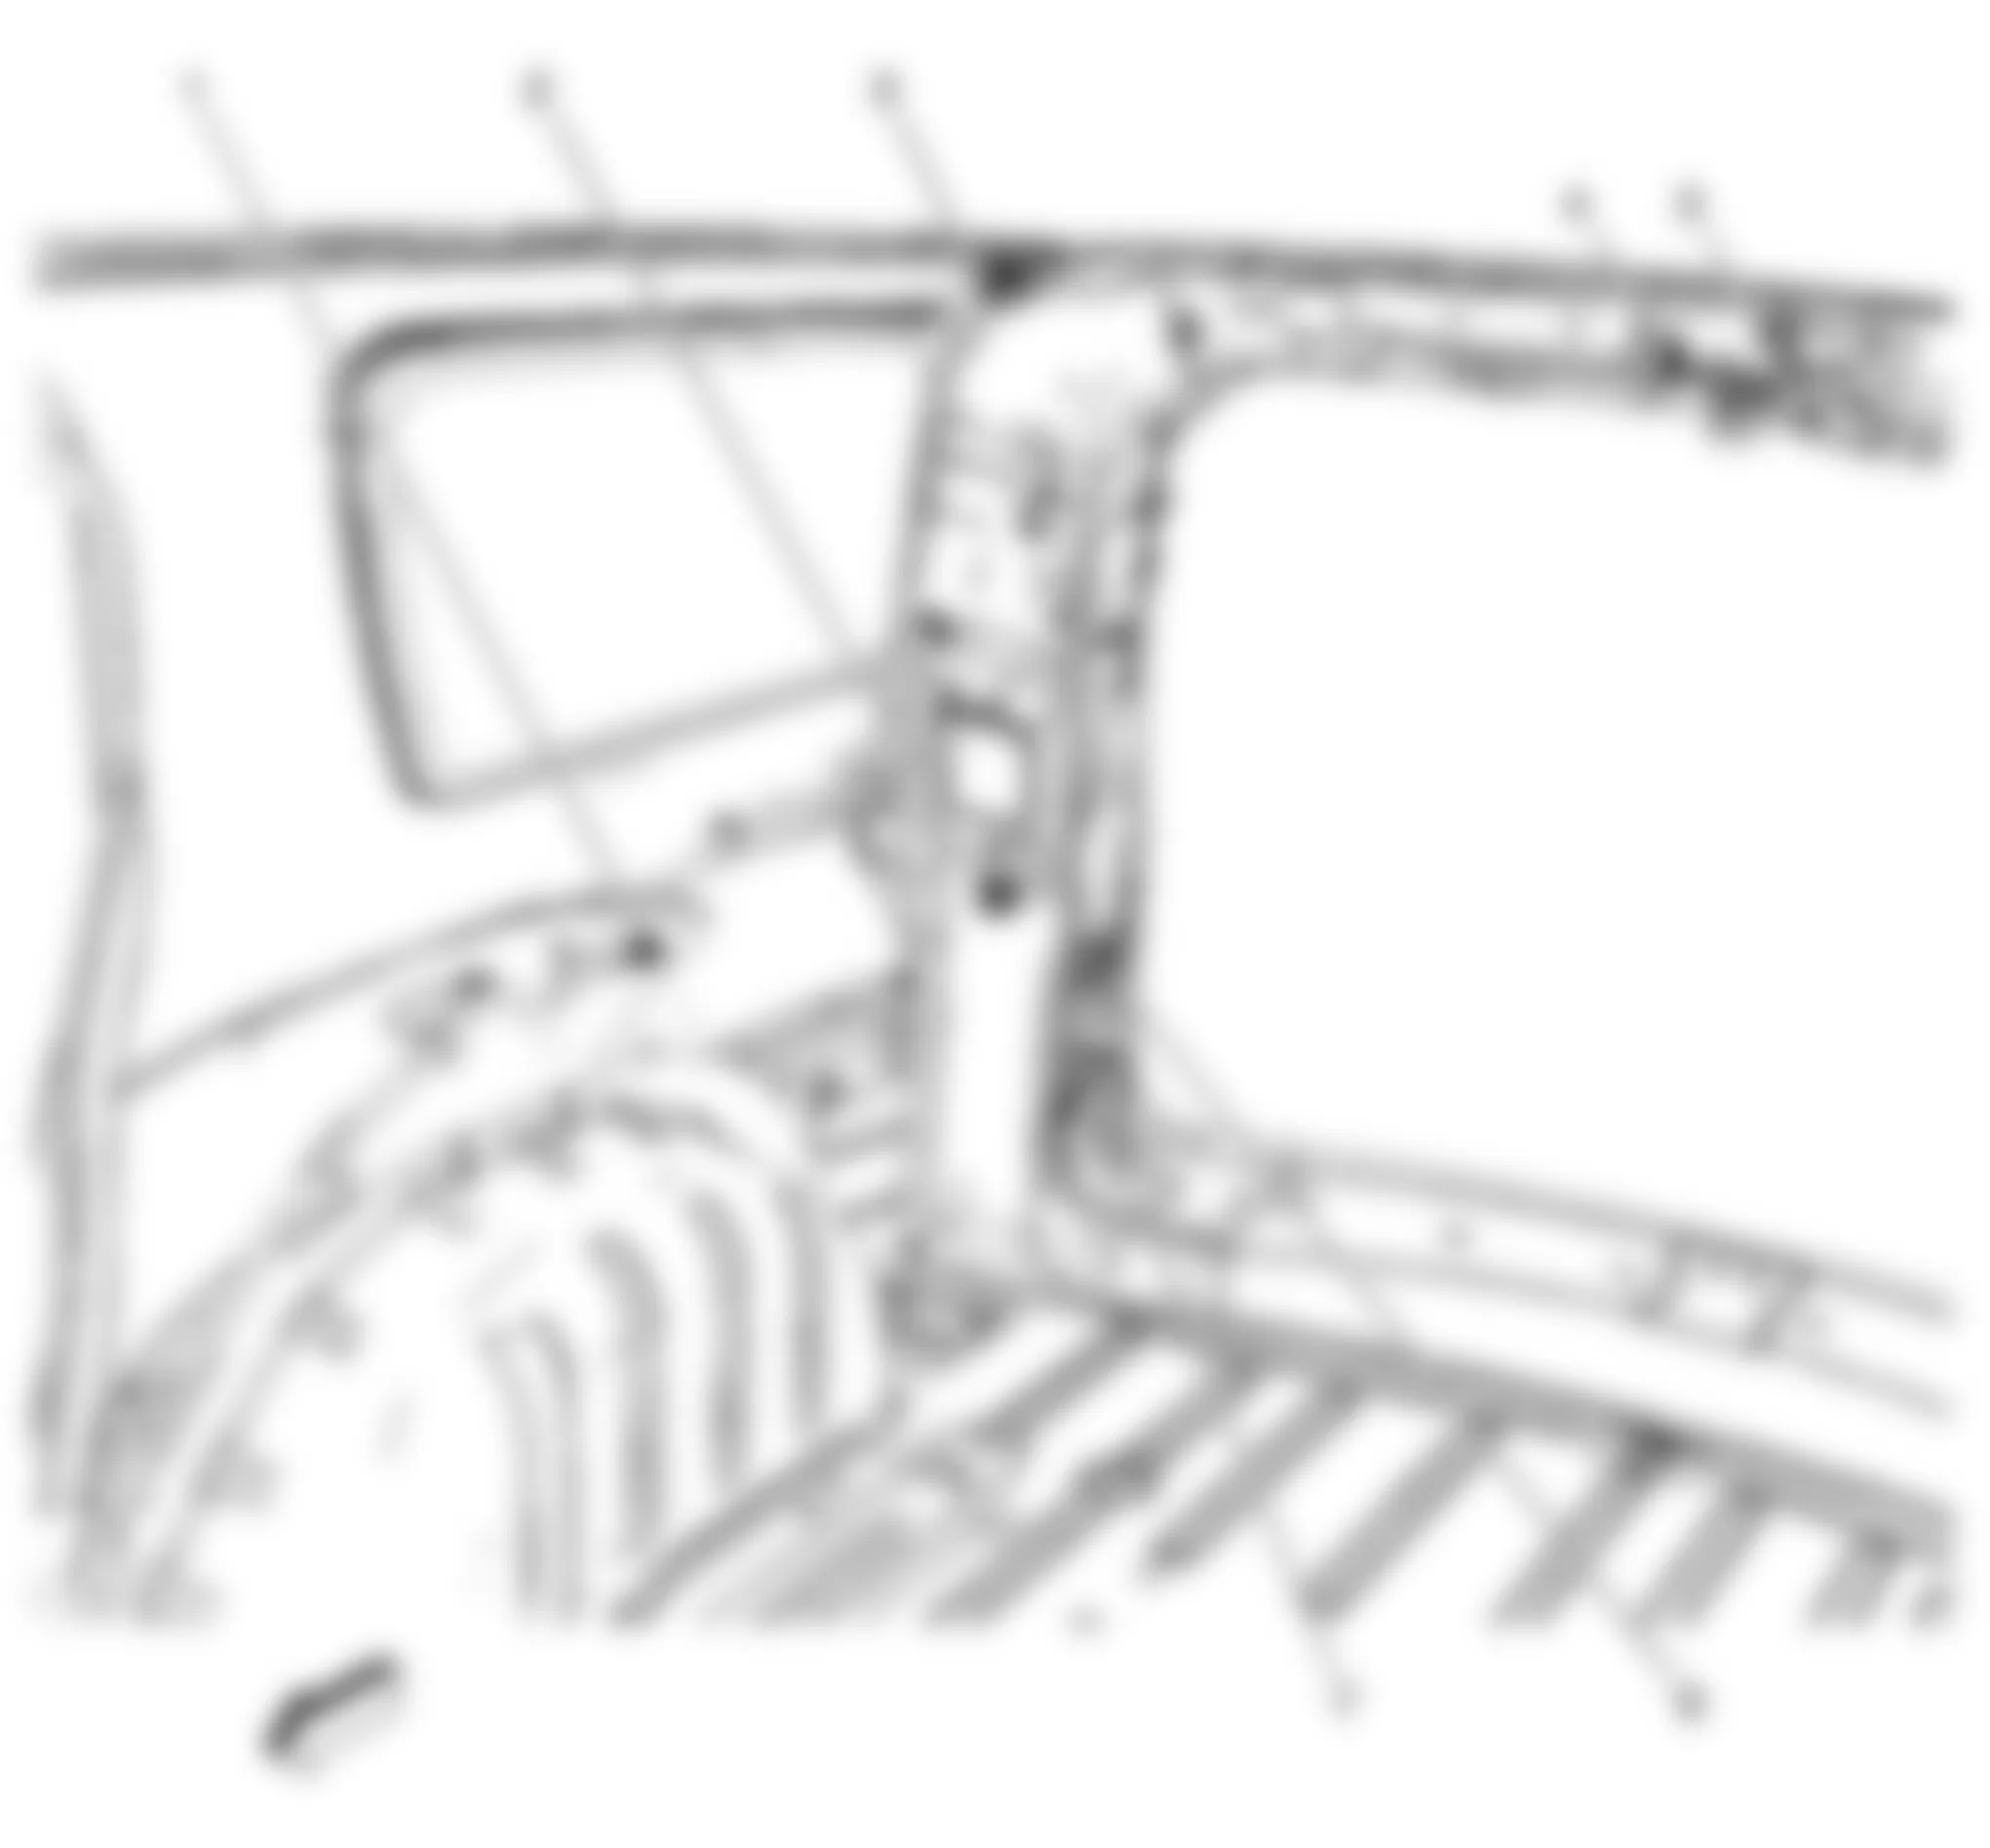 Buick Enclave CXL 2009 - Component Locations -  Right Rear Of Passenger Compartment